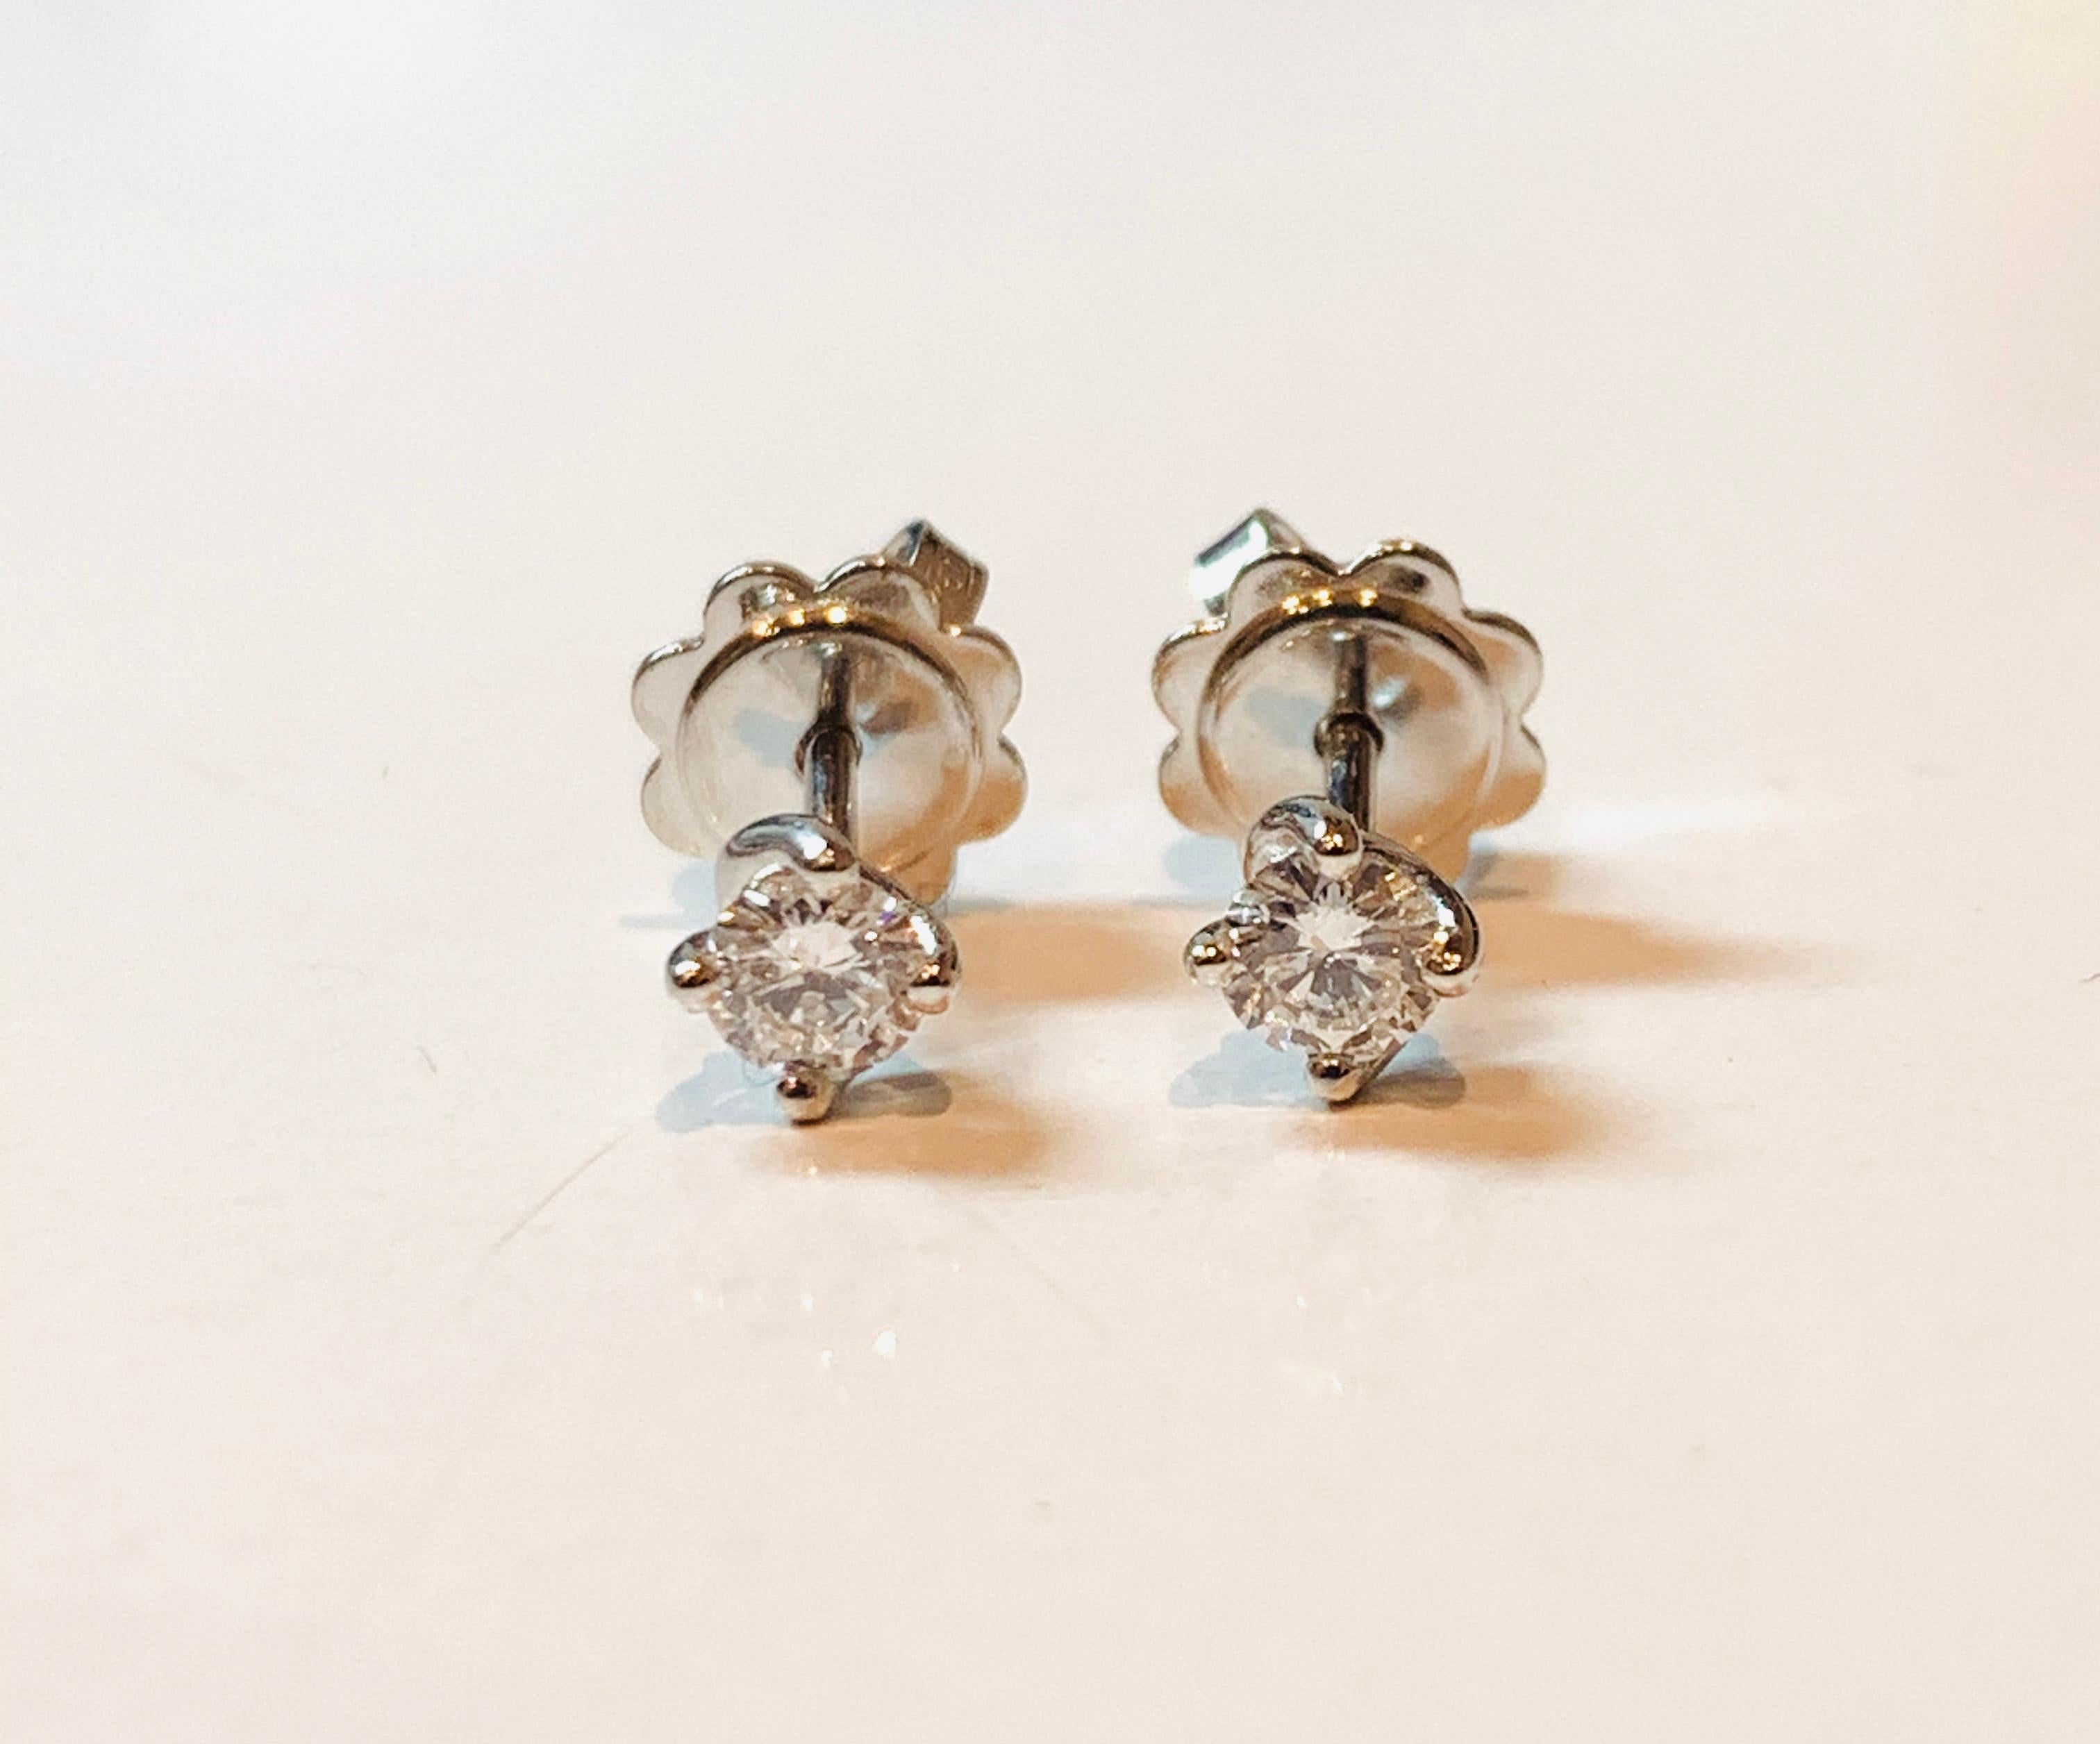 These certified 0.34 carat Diamond stud earrings are from the HRD Antwerp flower collection. 

Designed with 4 twisted prongs, the Diamond sits nestled within the 18Kt white Gold setting, and secured on the ear with butterfly backs. 

High quality